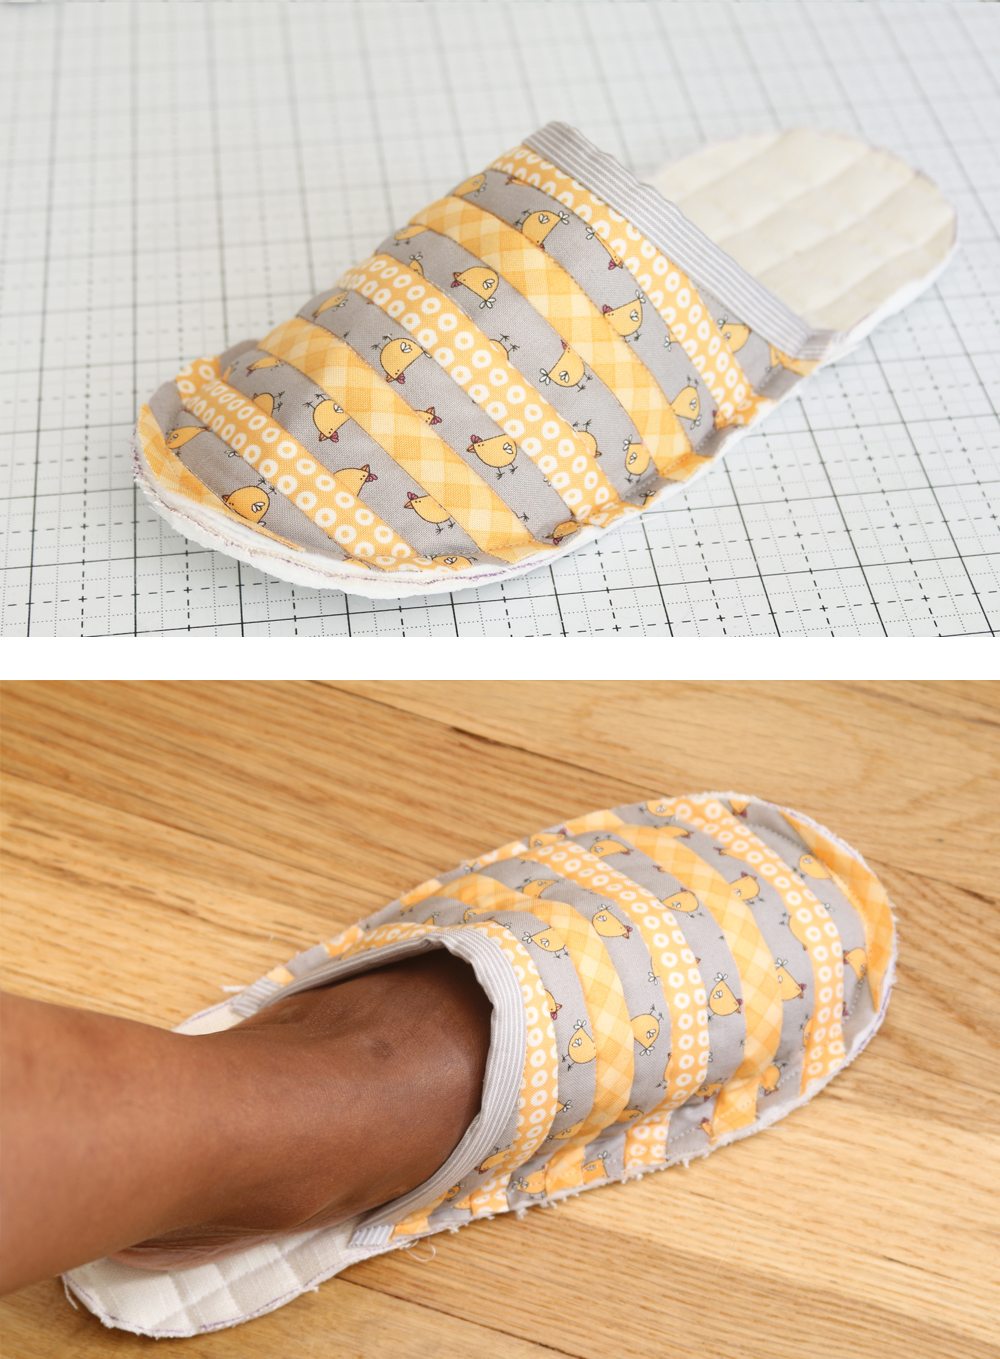 Learn everything you need to know to make a pair of quilted slippers that are just your size in this beginner-friendly photo tutorial! suzyquilts.com #quilting #sewingdiy